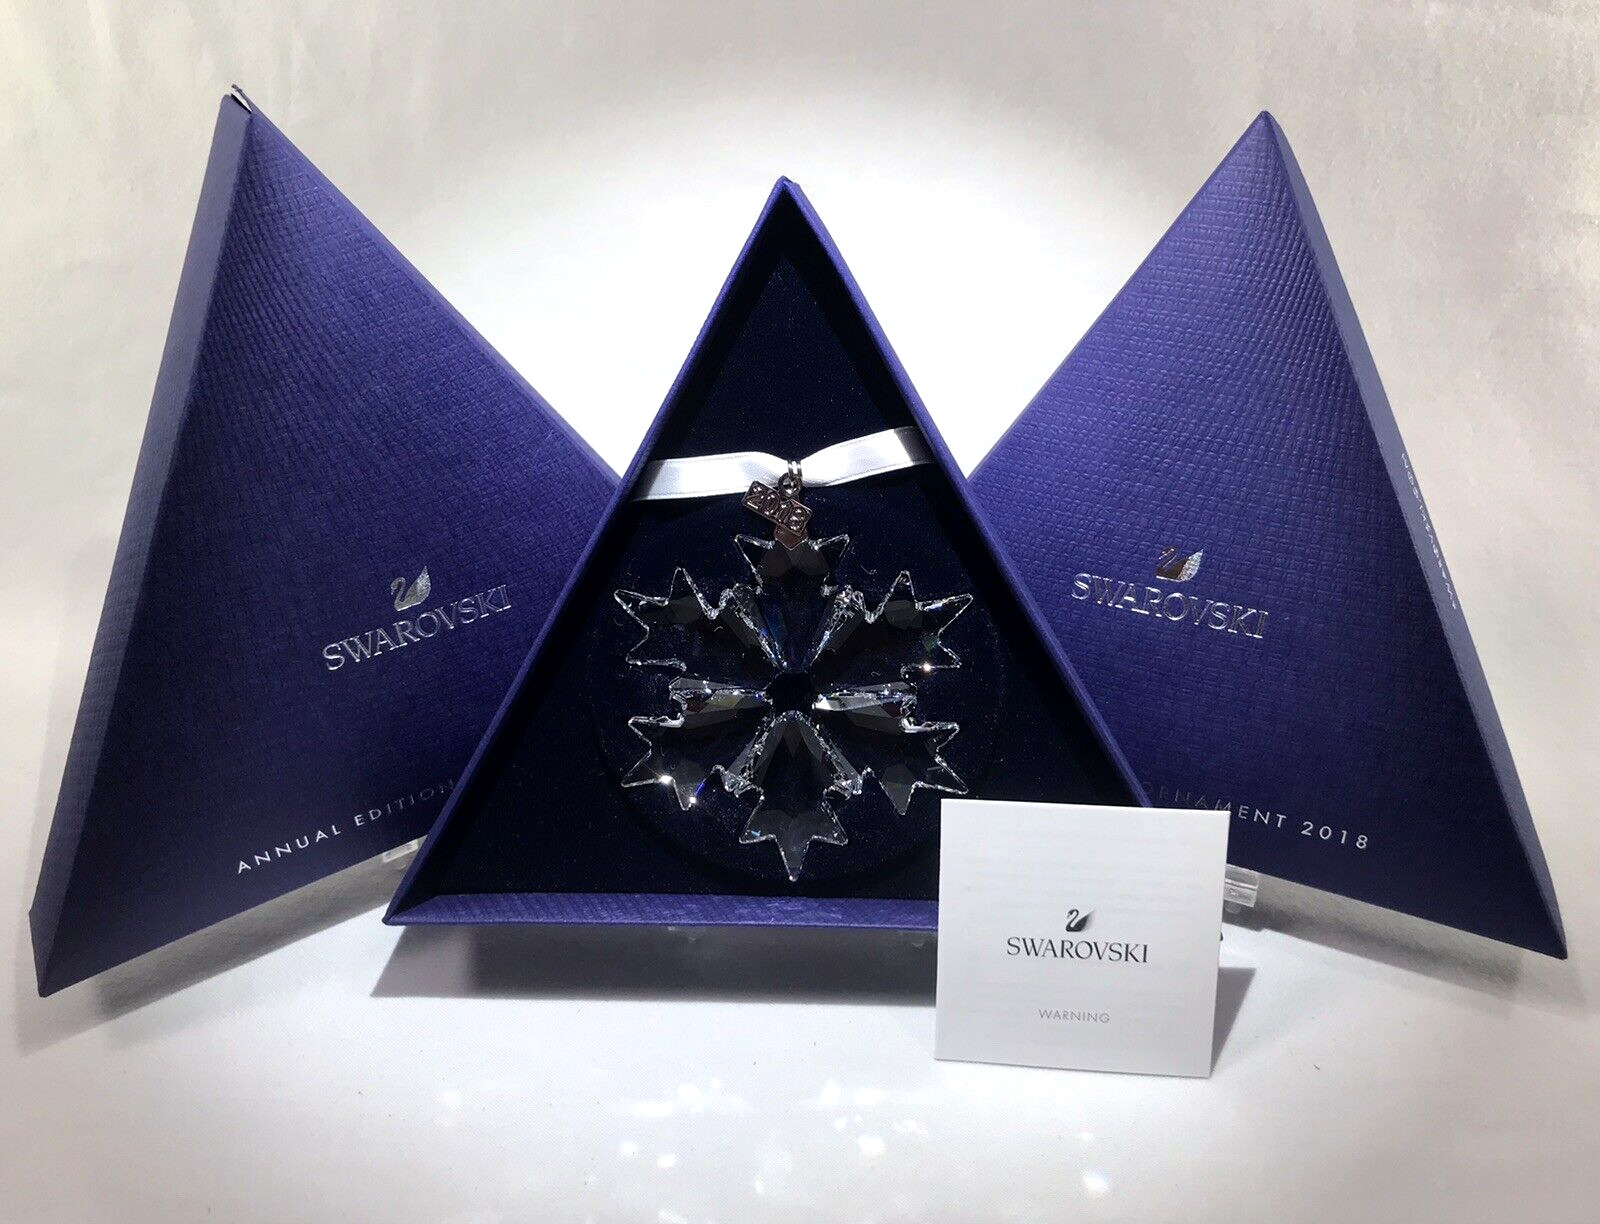 SWAROVSKI 2018 ANNUAL EDITION LARGE CLEAR ORNAMENT 5301575 AUTHENTIC *BRAND NEW*